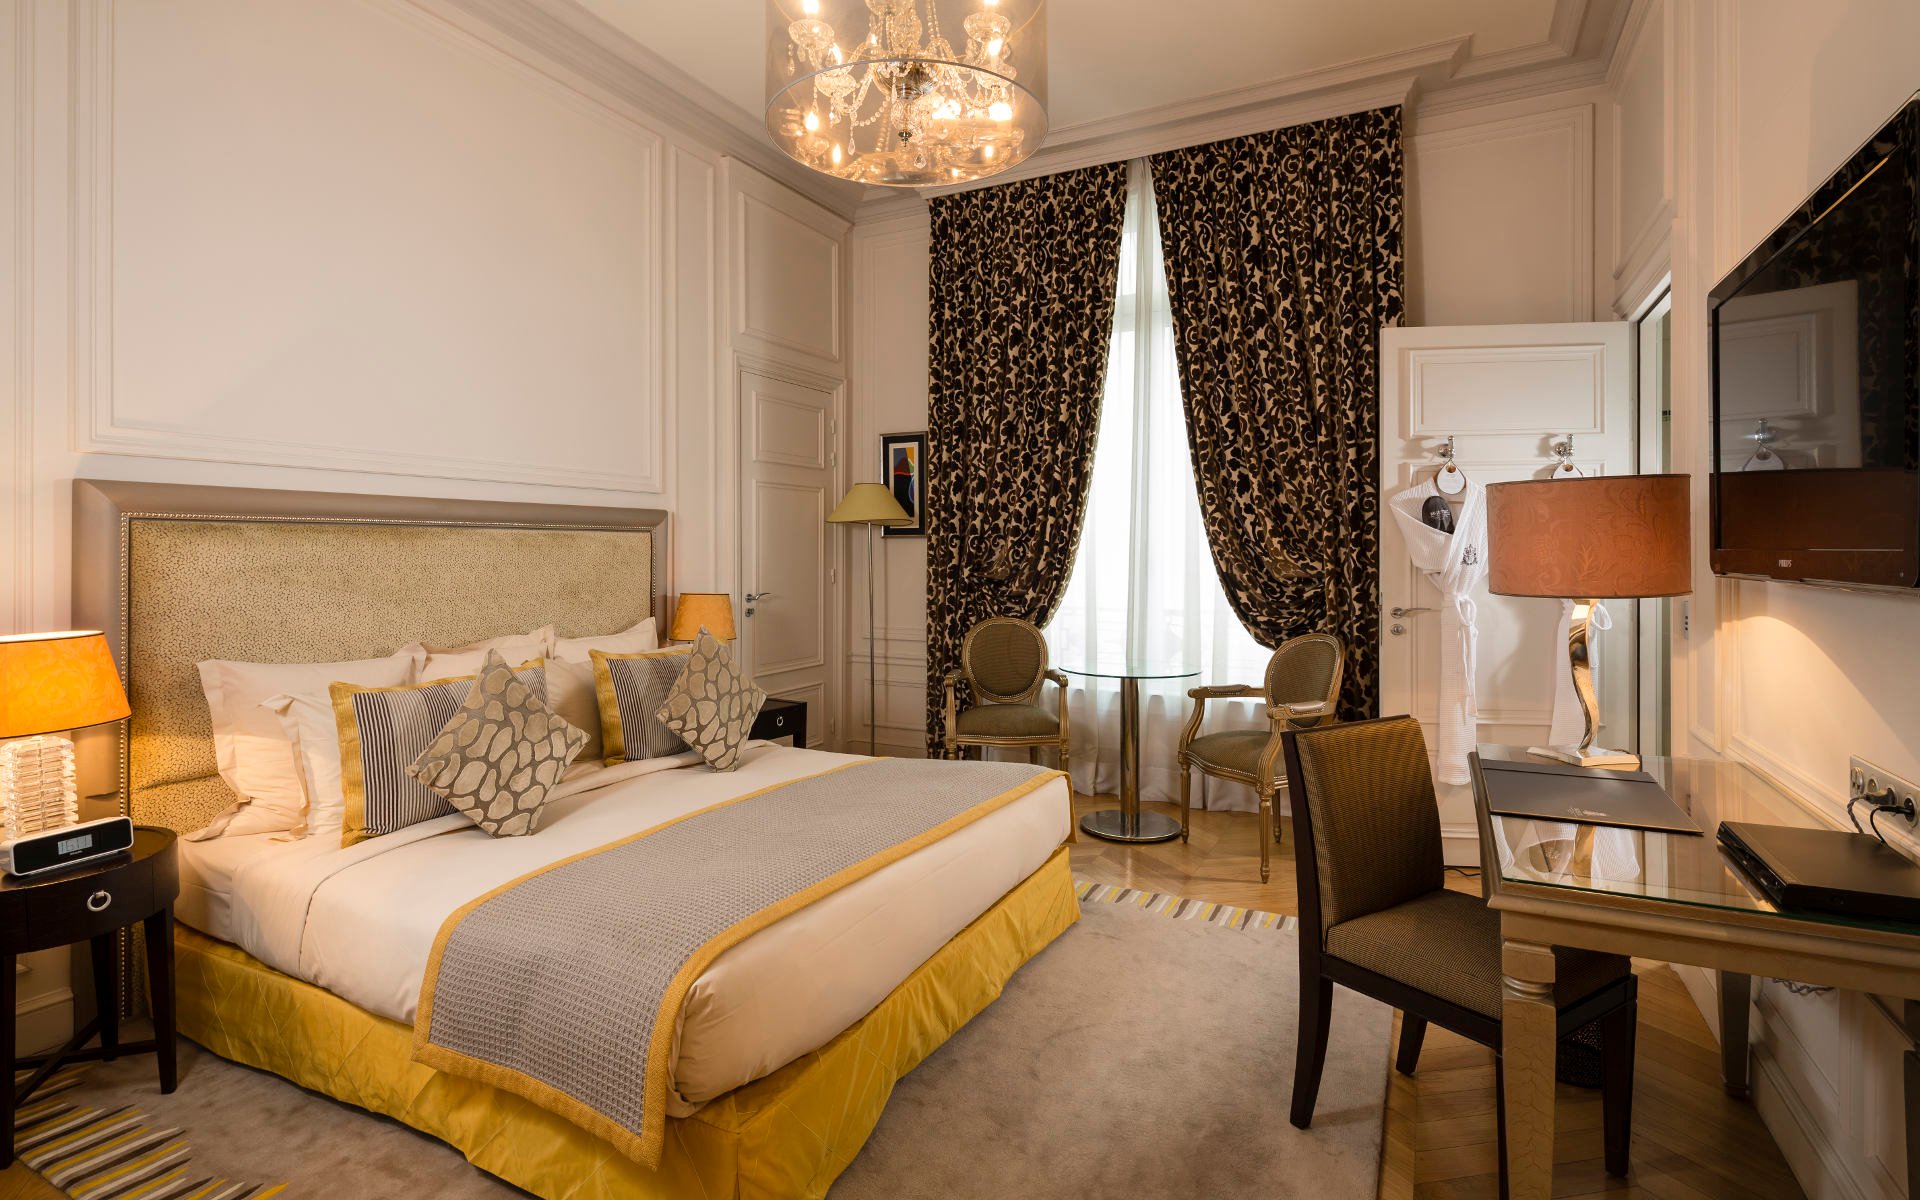 260/Rooms/Grand deluxe/Room Grand Deluxe 2-  Majestic Hotel-Spa.jpg